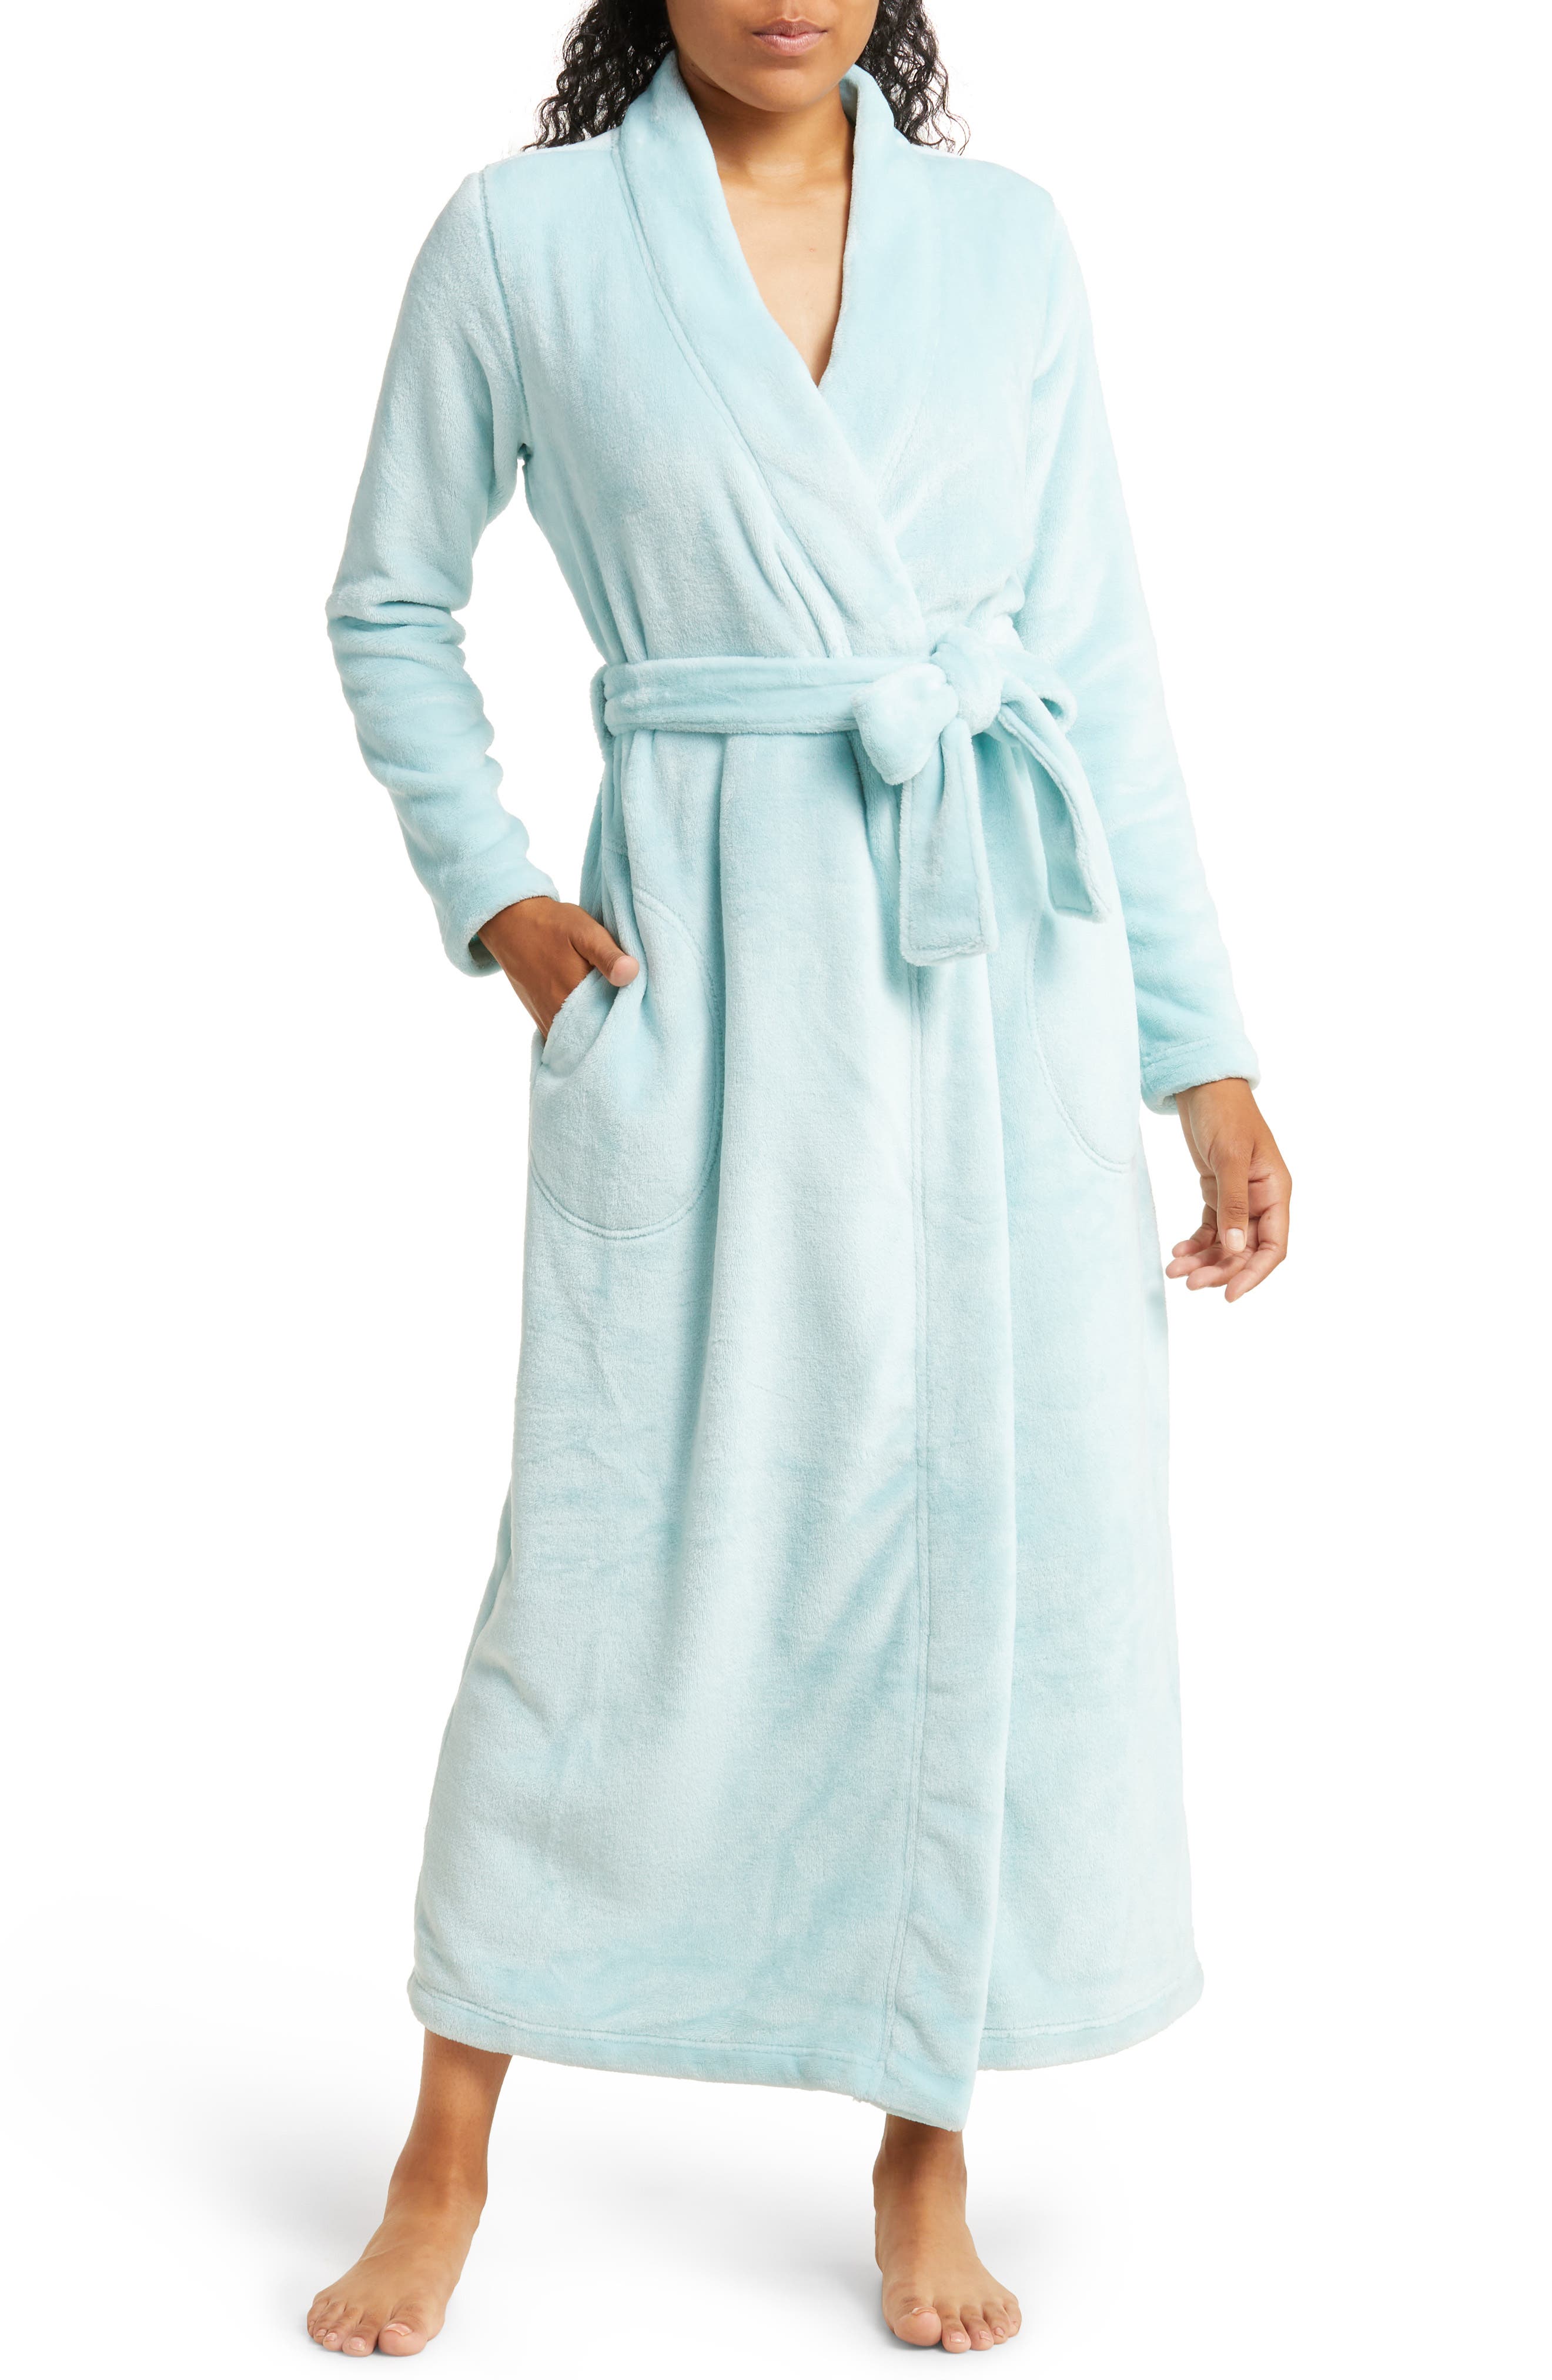 robe dresses and bathrobes Womens Clothing Nightwear and sleepwear Robes Blue Amazon Essentials Knit Robe in Pale Blue 